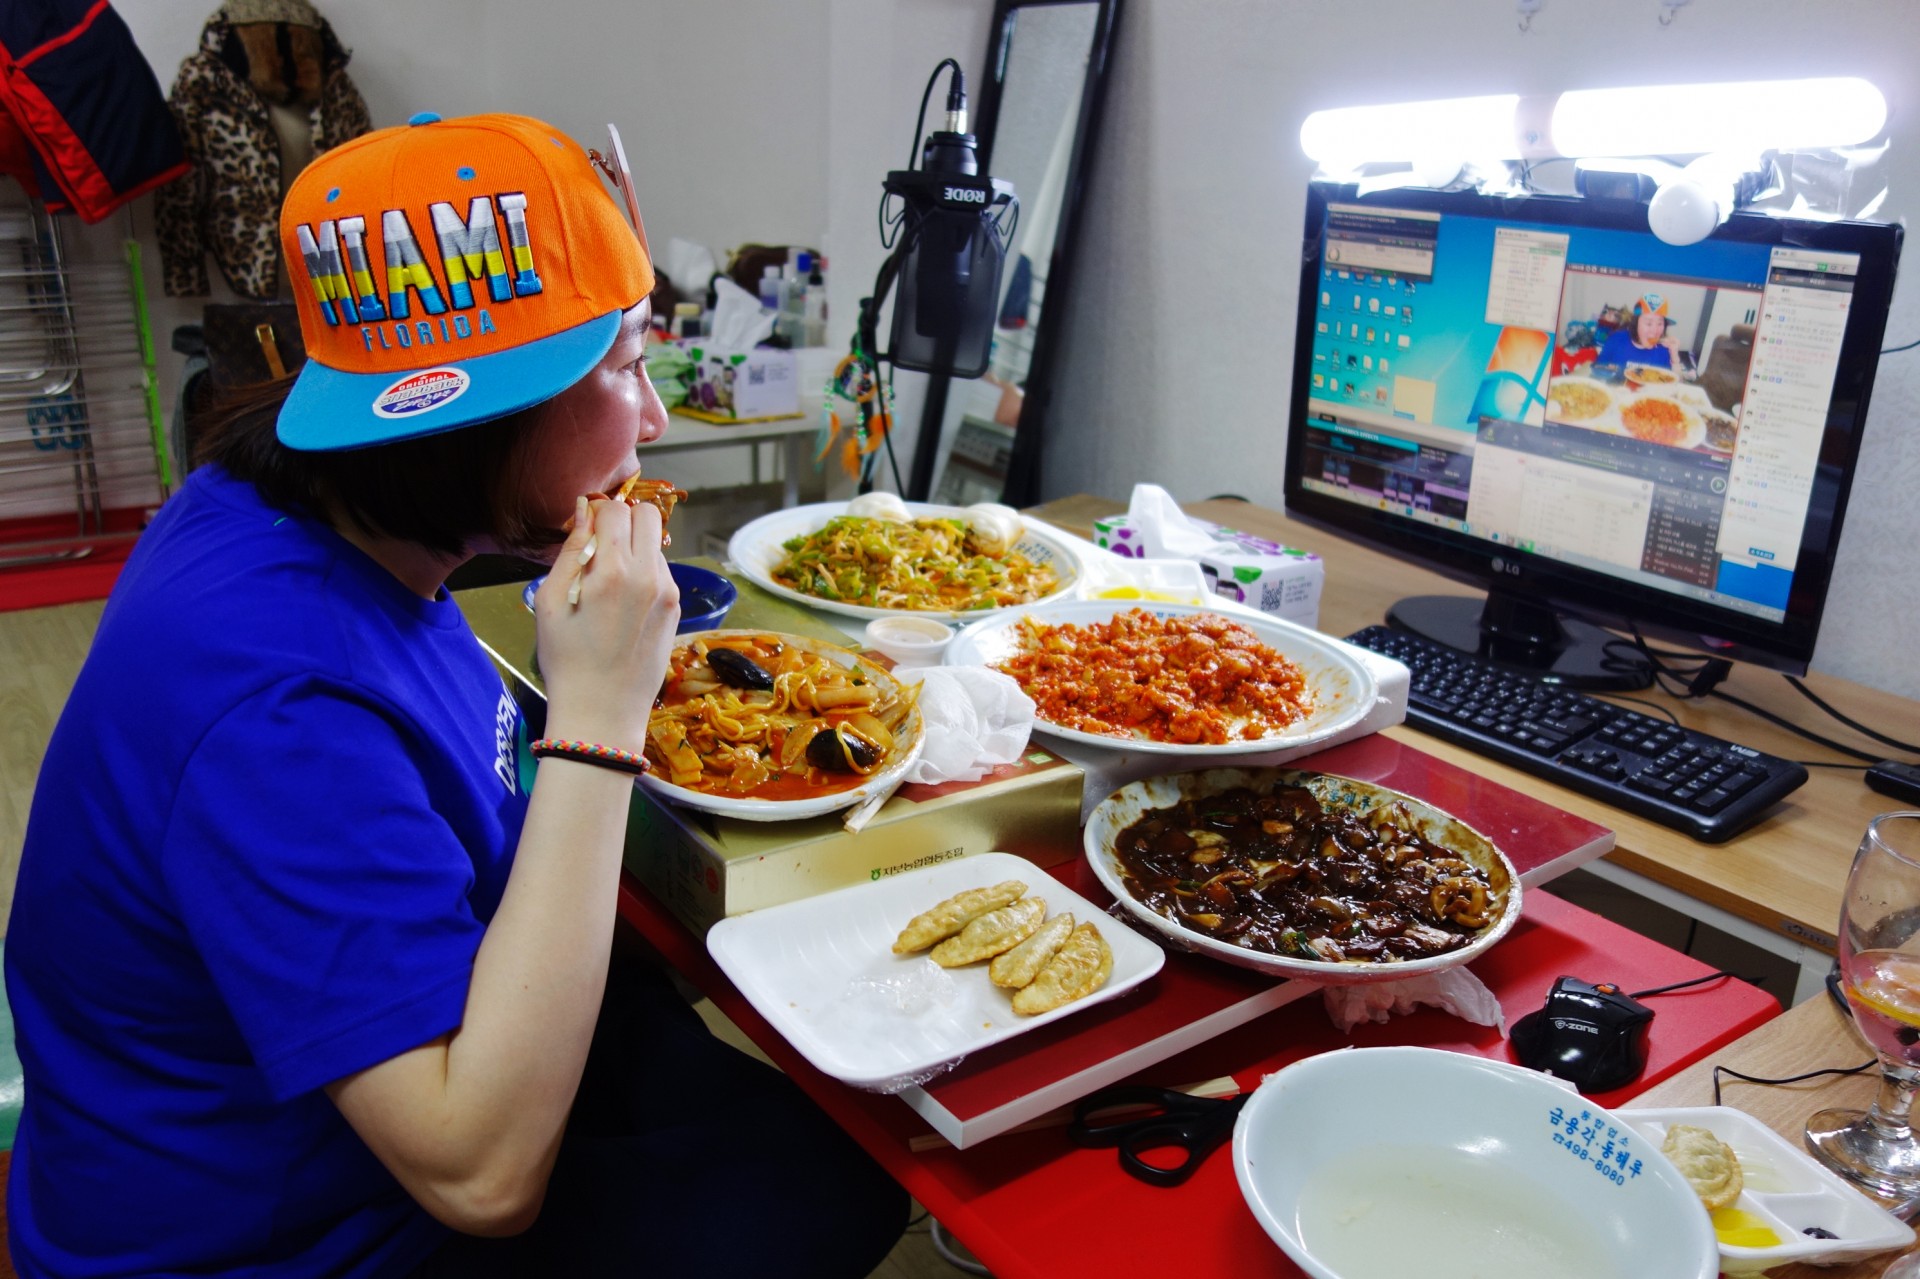 Rachel Ahn, who goes by "Aebong-ee," is among the top 100 most-watched mukbang stars in South Korea. Photo: Elise Hu/NPR